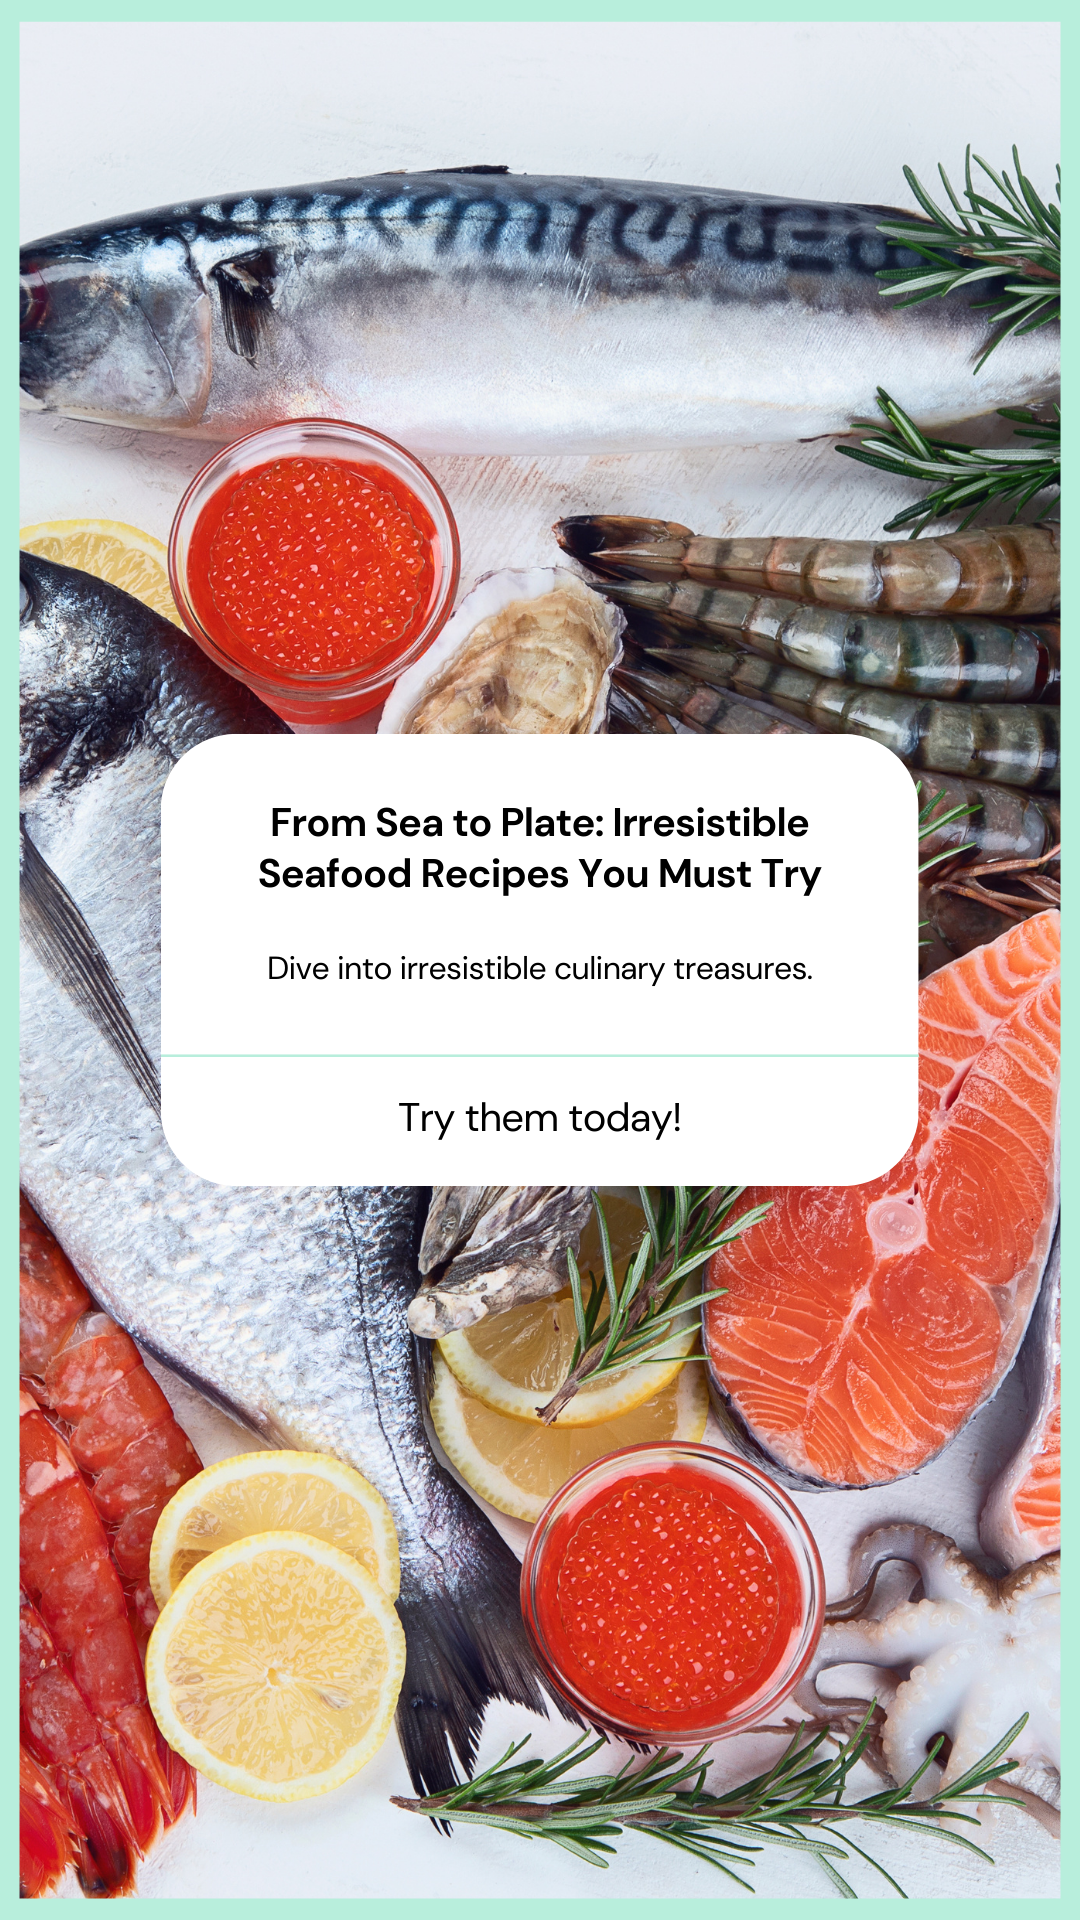 From Sea to Plate: Irresistible Seafood Recipes You Must Try